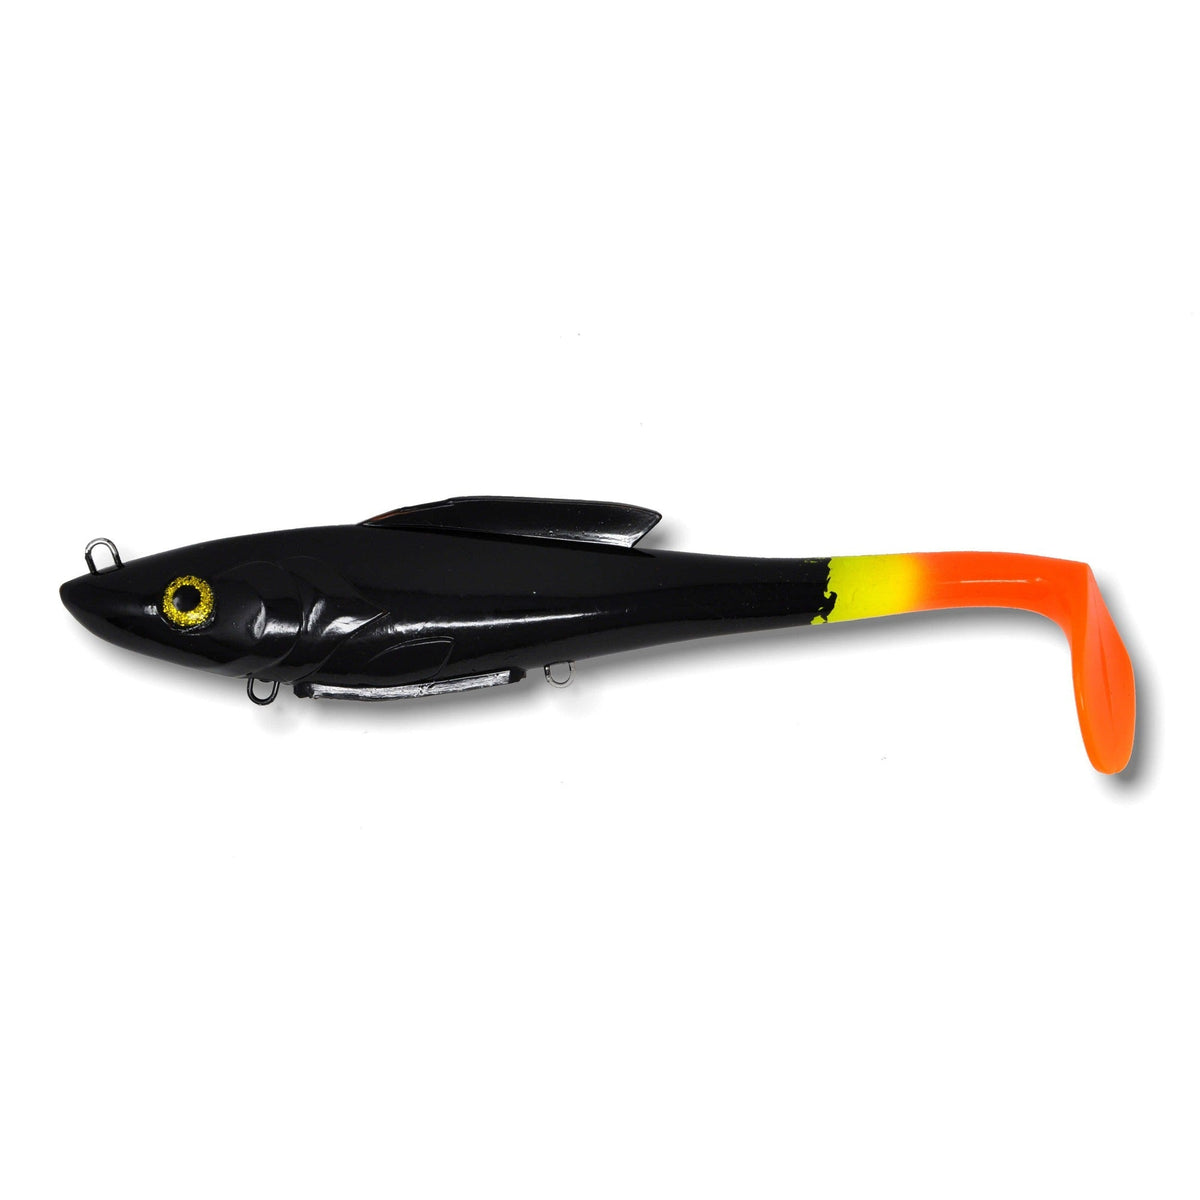 View of Swimbaits Toddy Tickle Baits Warhammer Swimbait Fire Tail available at EZOKO Pike and Musky Shop